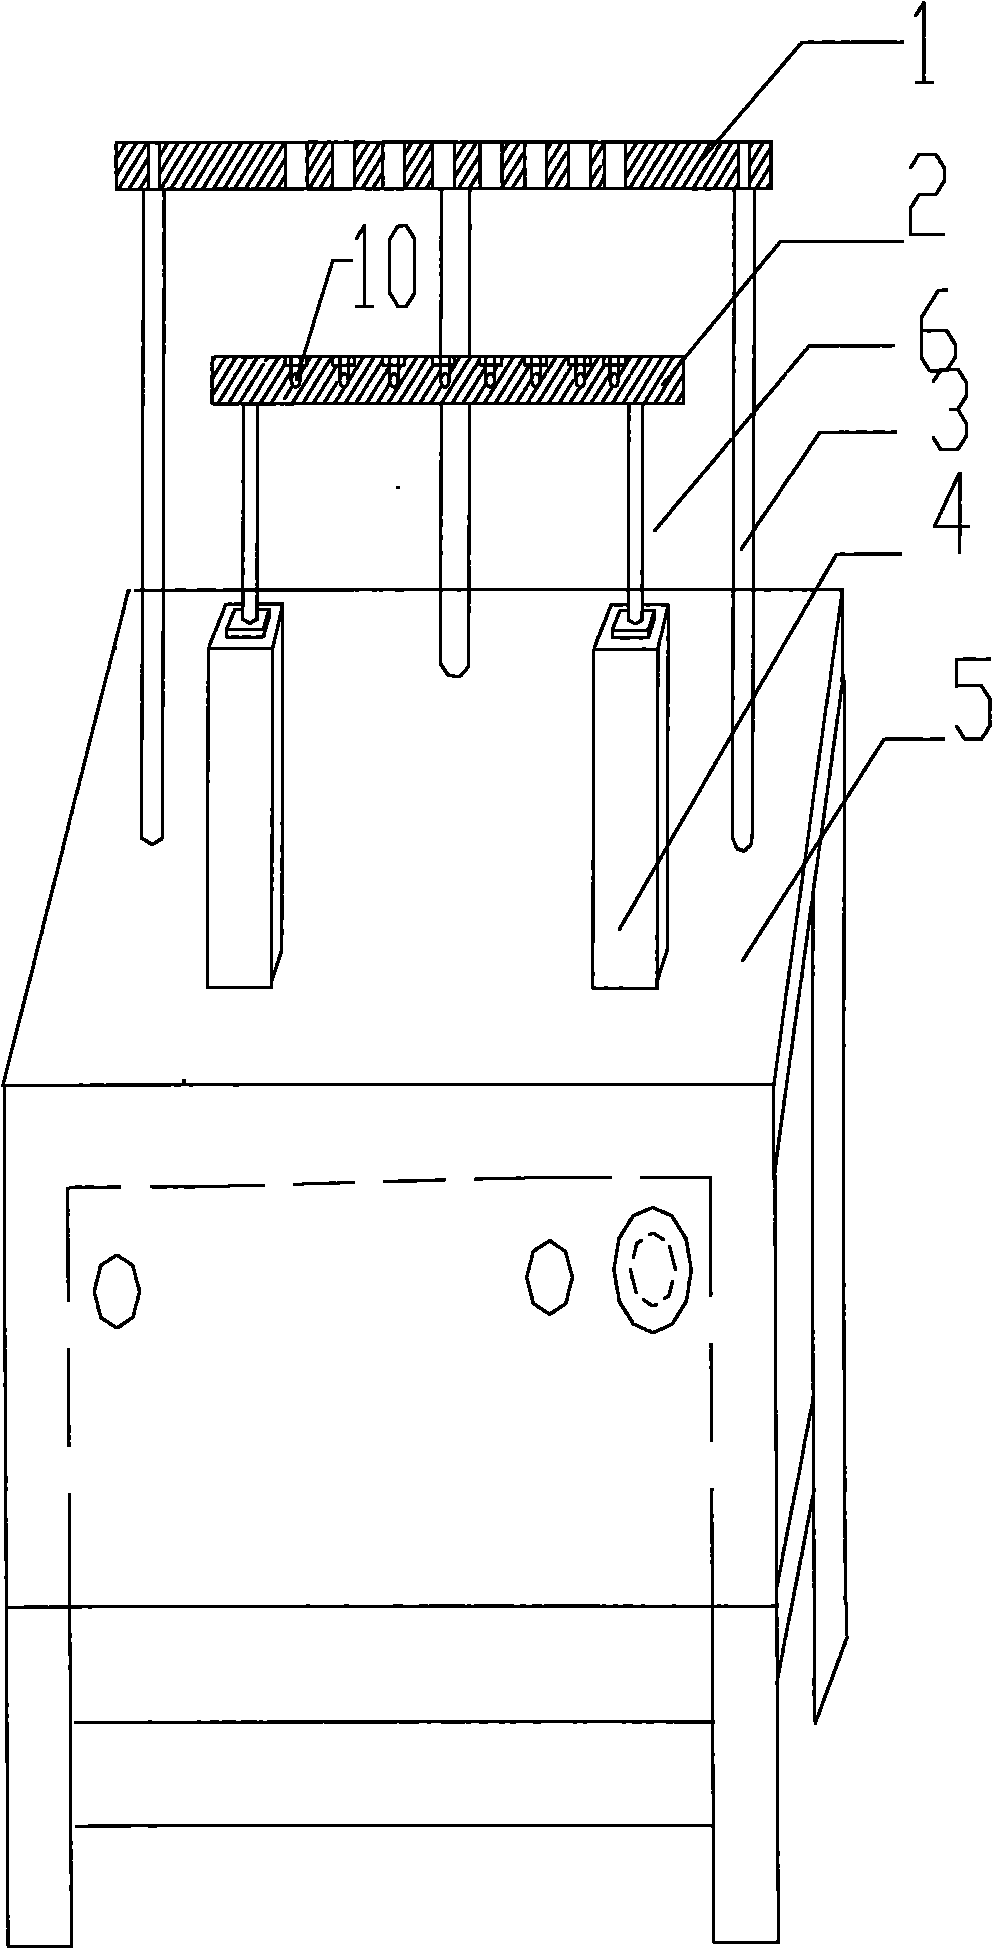 Device for determining water tightness